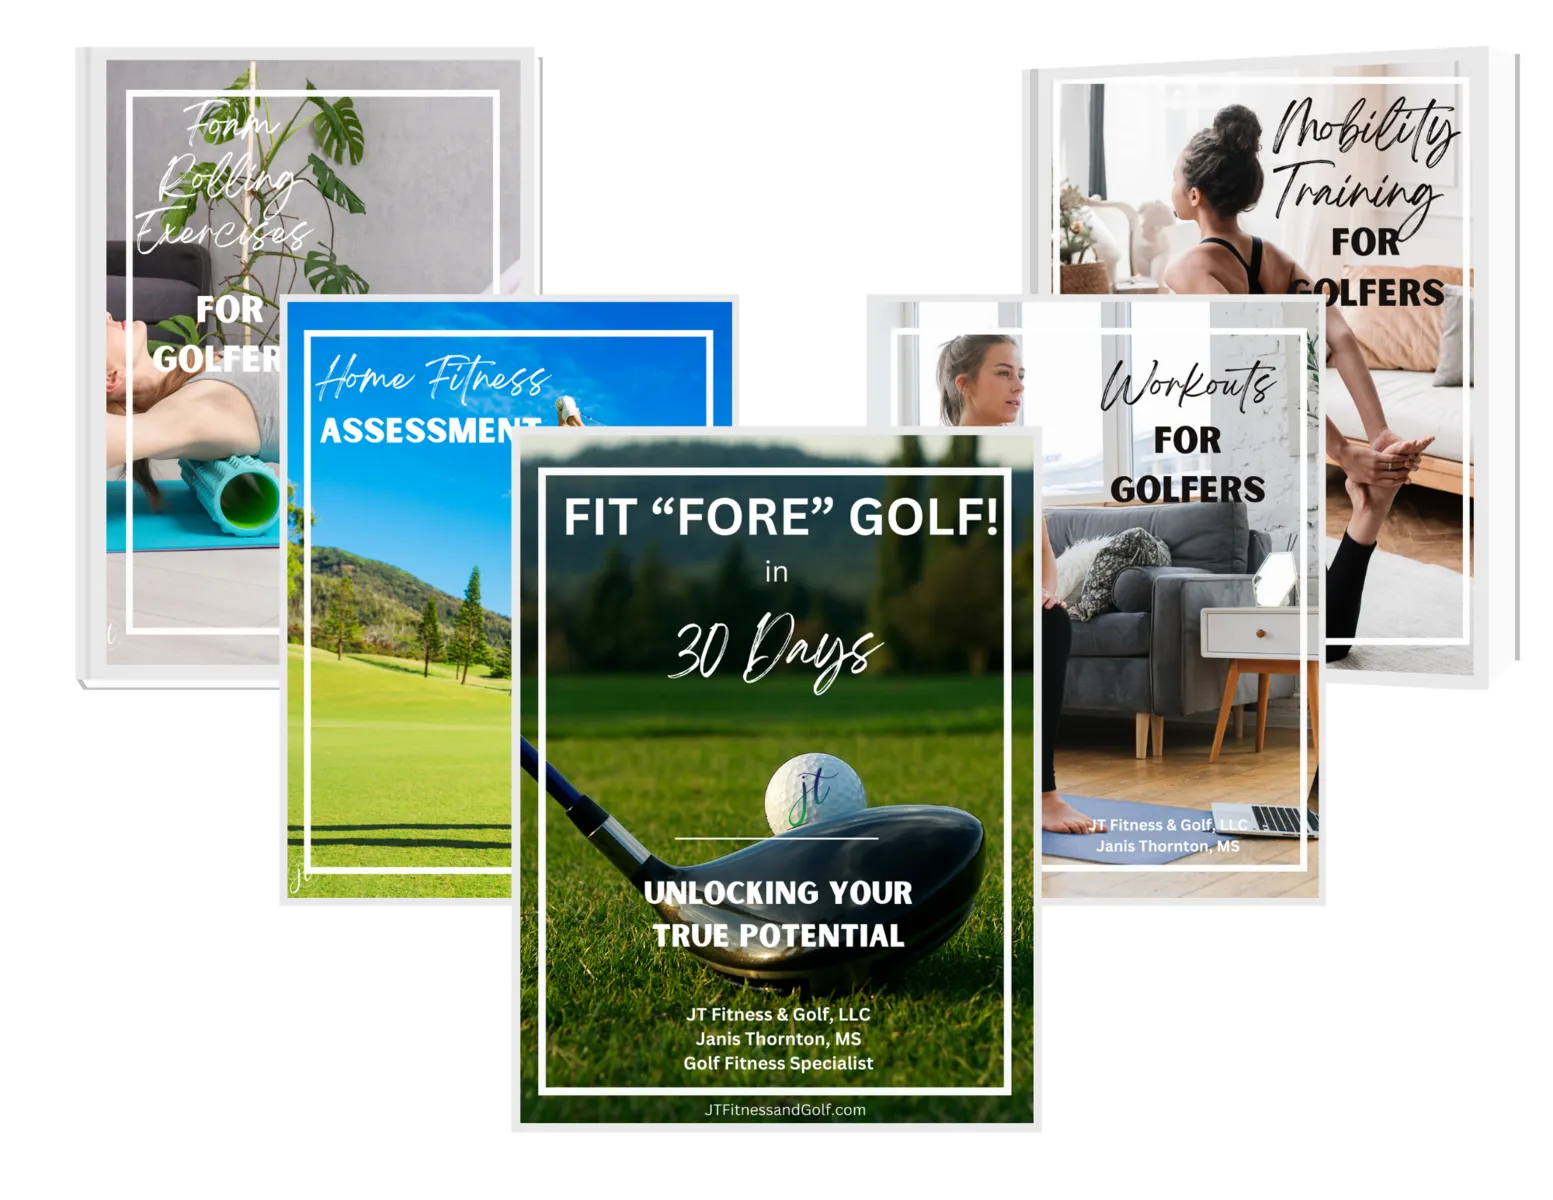 Fit "FORE" Golf in 30 Days! 